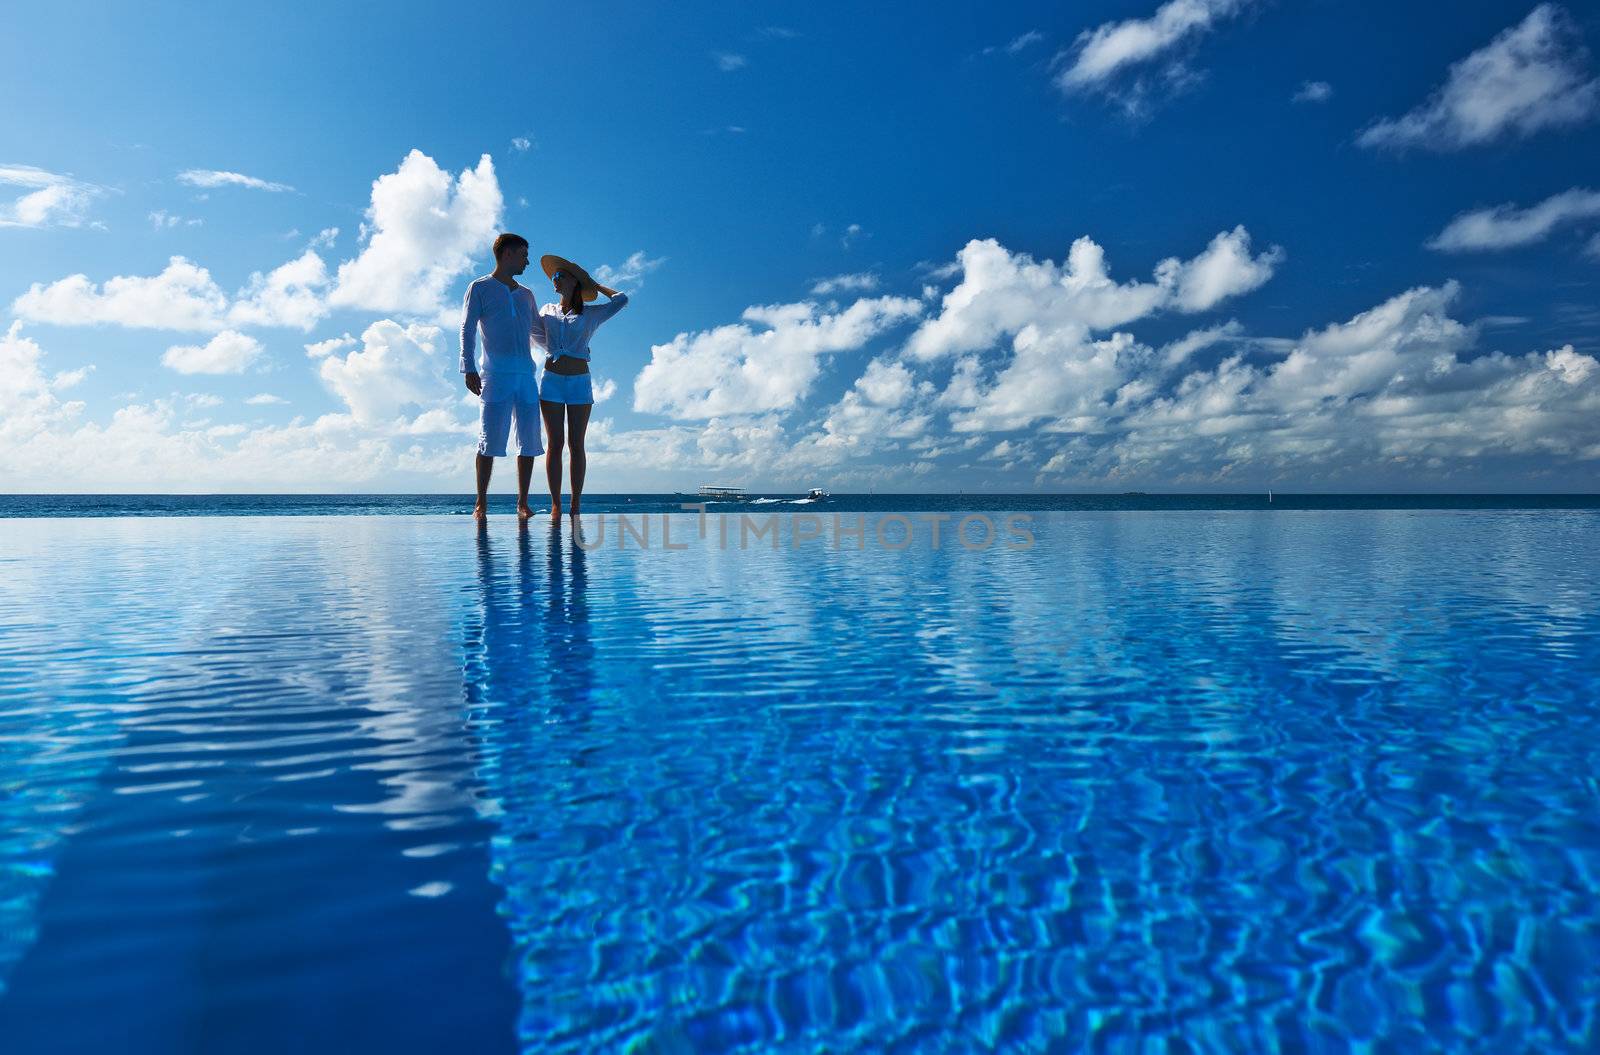 Couple at the poolside against sky